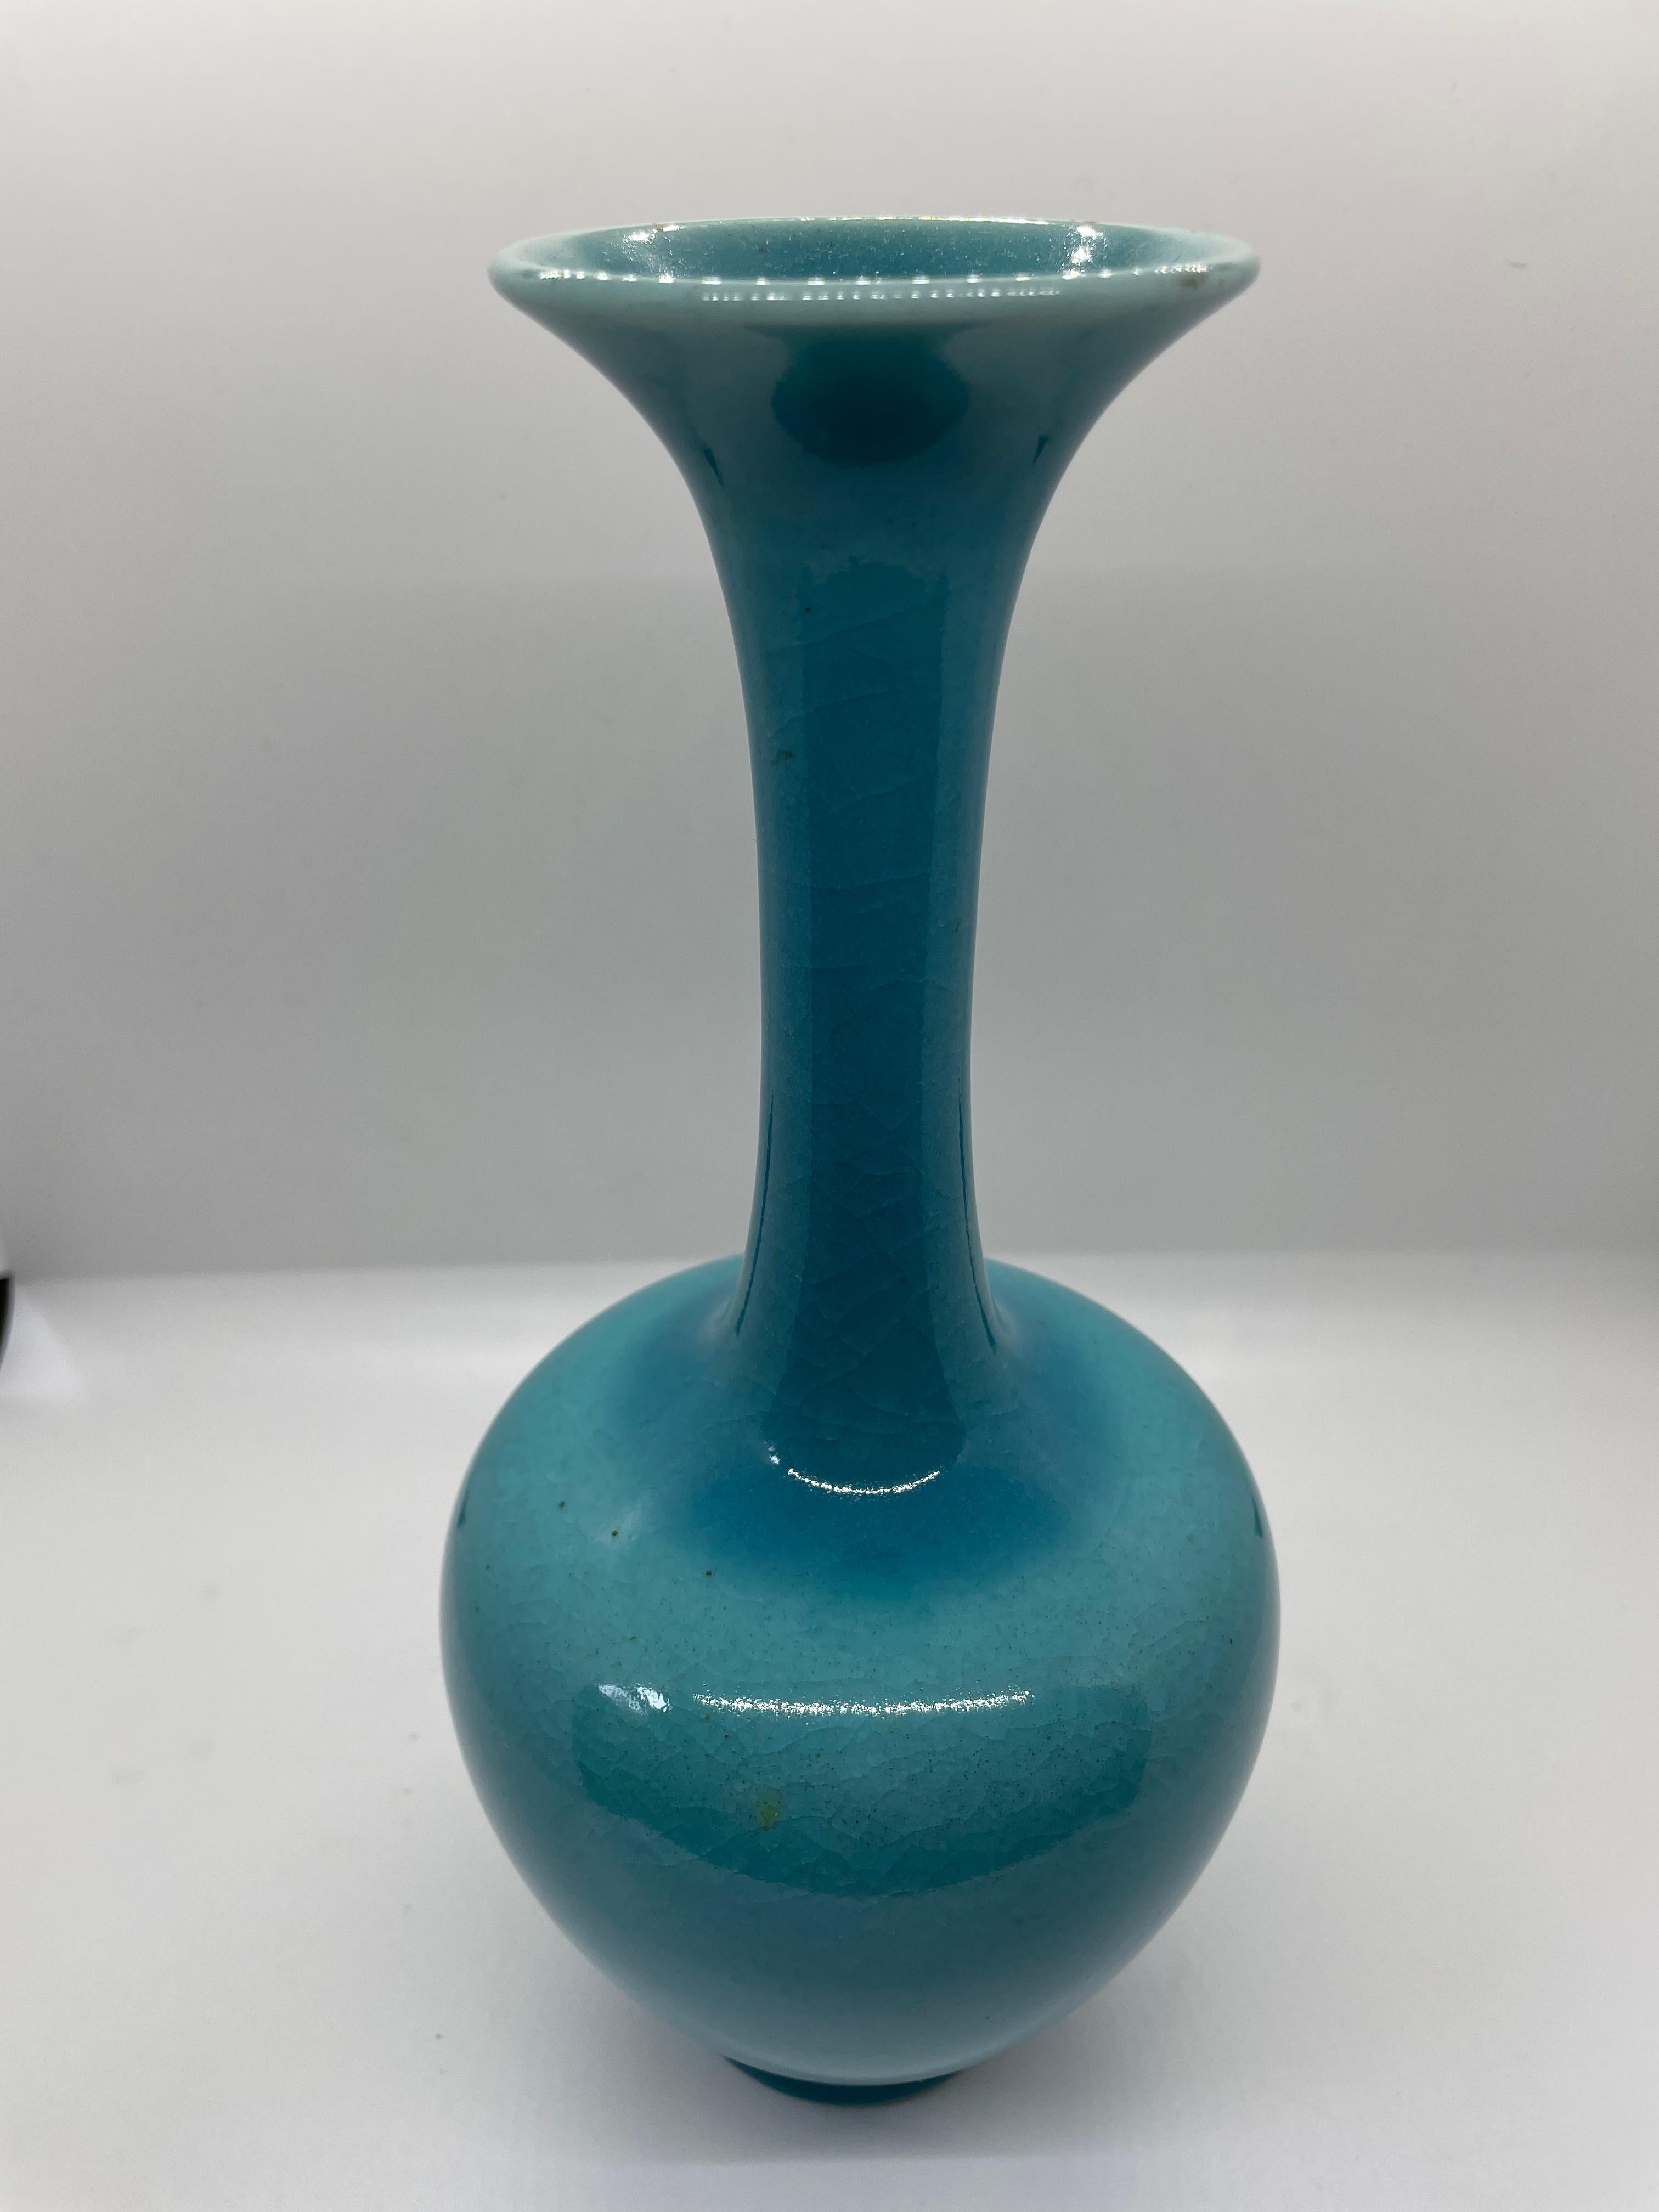 Gorgeous shade of blue on this form number 778 Rookwood Pottery vase circa 1942. Really cool all over craquelure (see video). Some spots of unknown origin do not detract but instead add to the vintage appeal of this vintage beauty! Art pottery is a